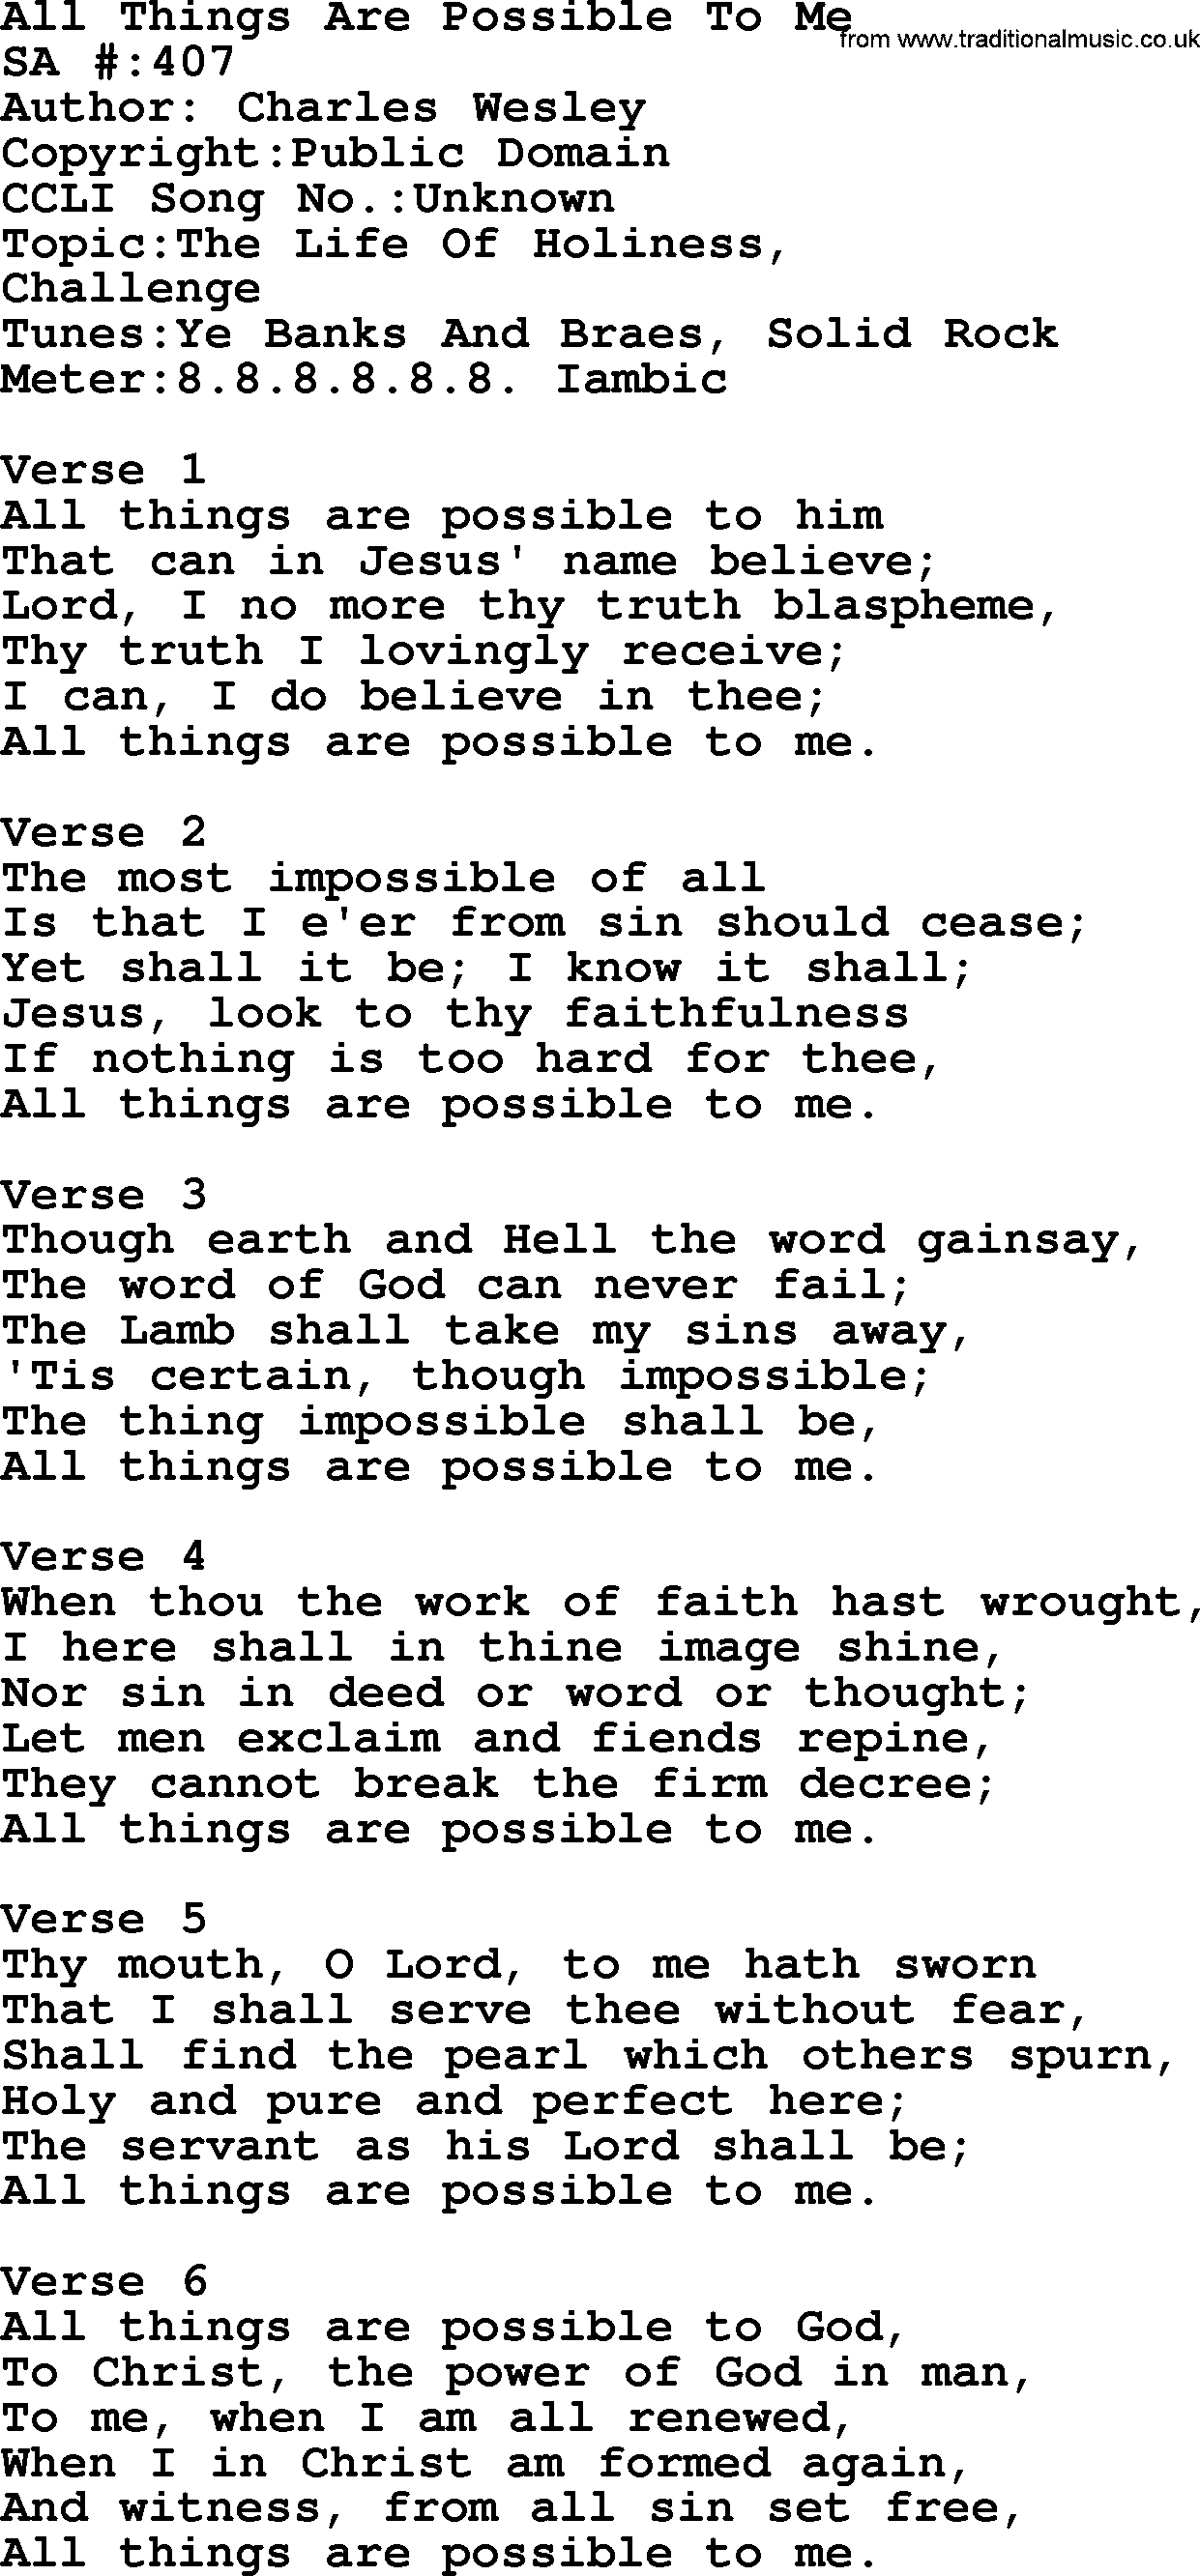 Salvation Army Hymnal, title: All Things Are Possible To Me, with lyrics and PDF,